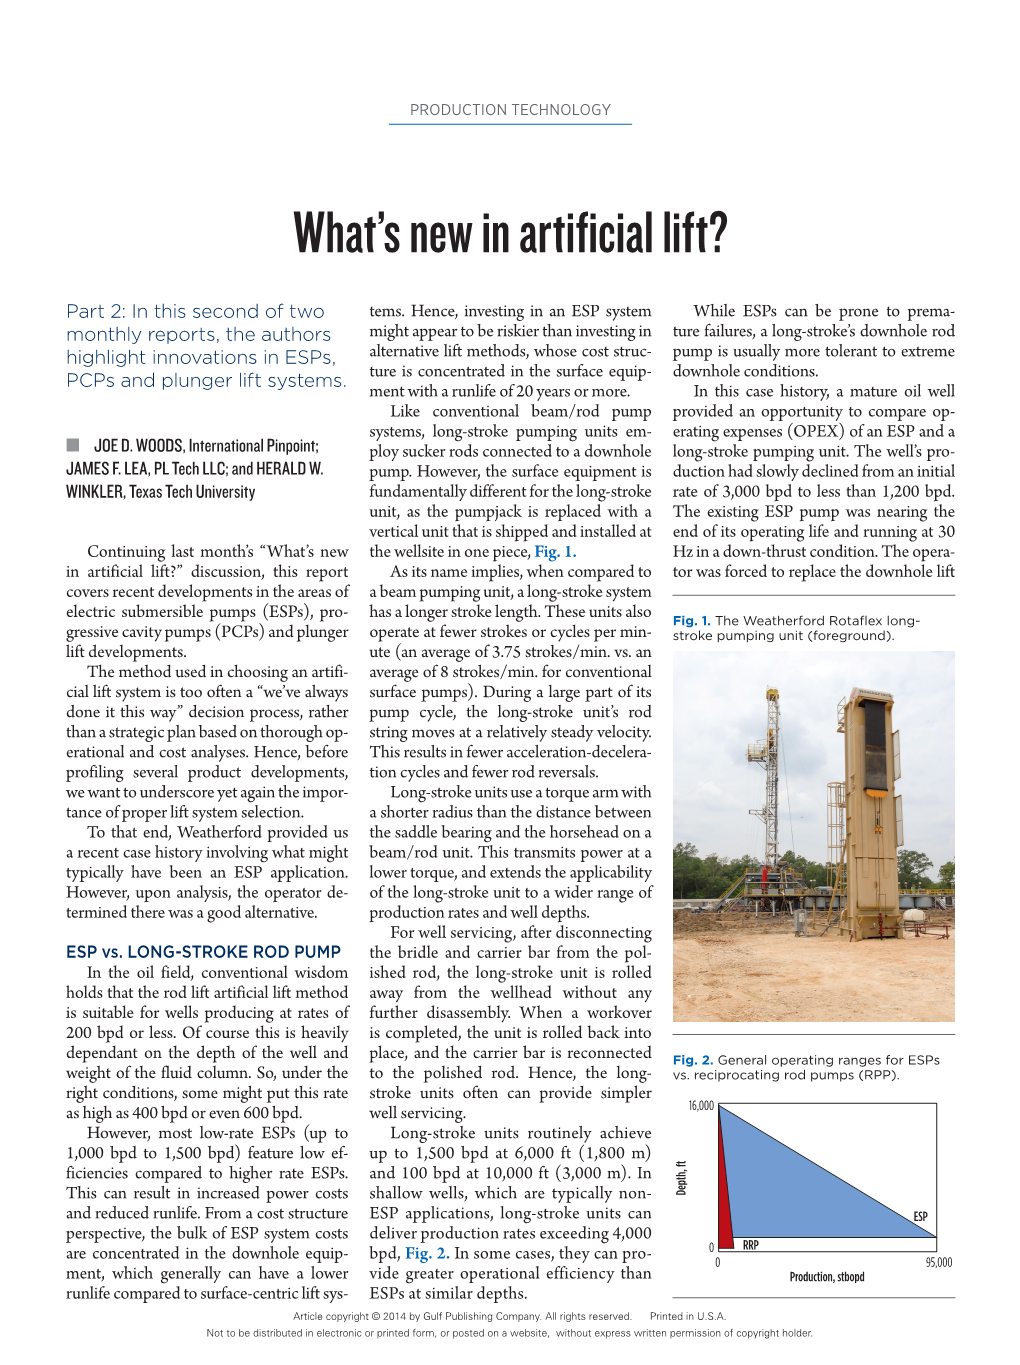 What's New in Artificial Lift?